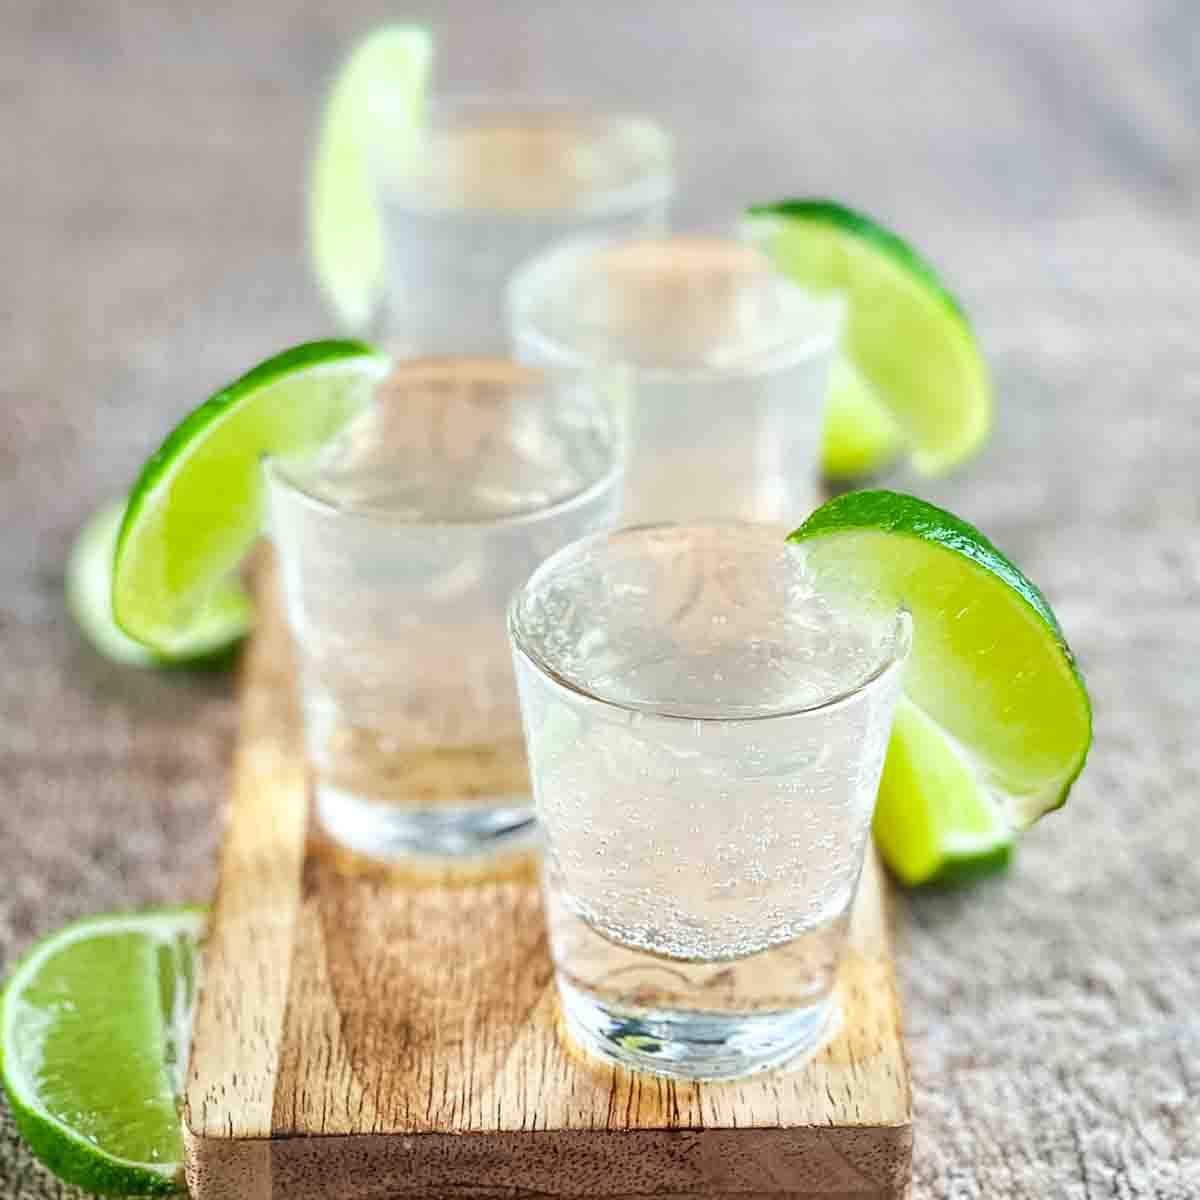 Four white tea shots on a wooden board, garnished with a lime wedge.